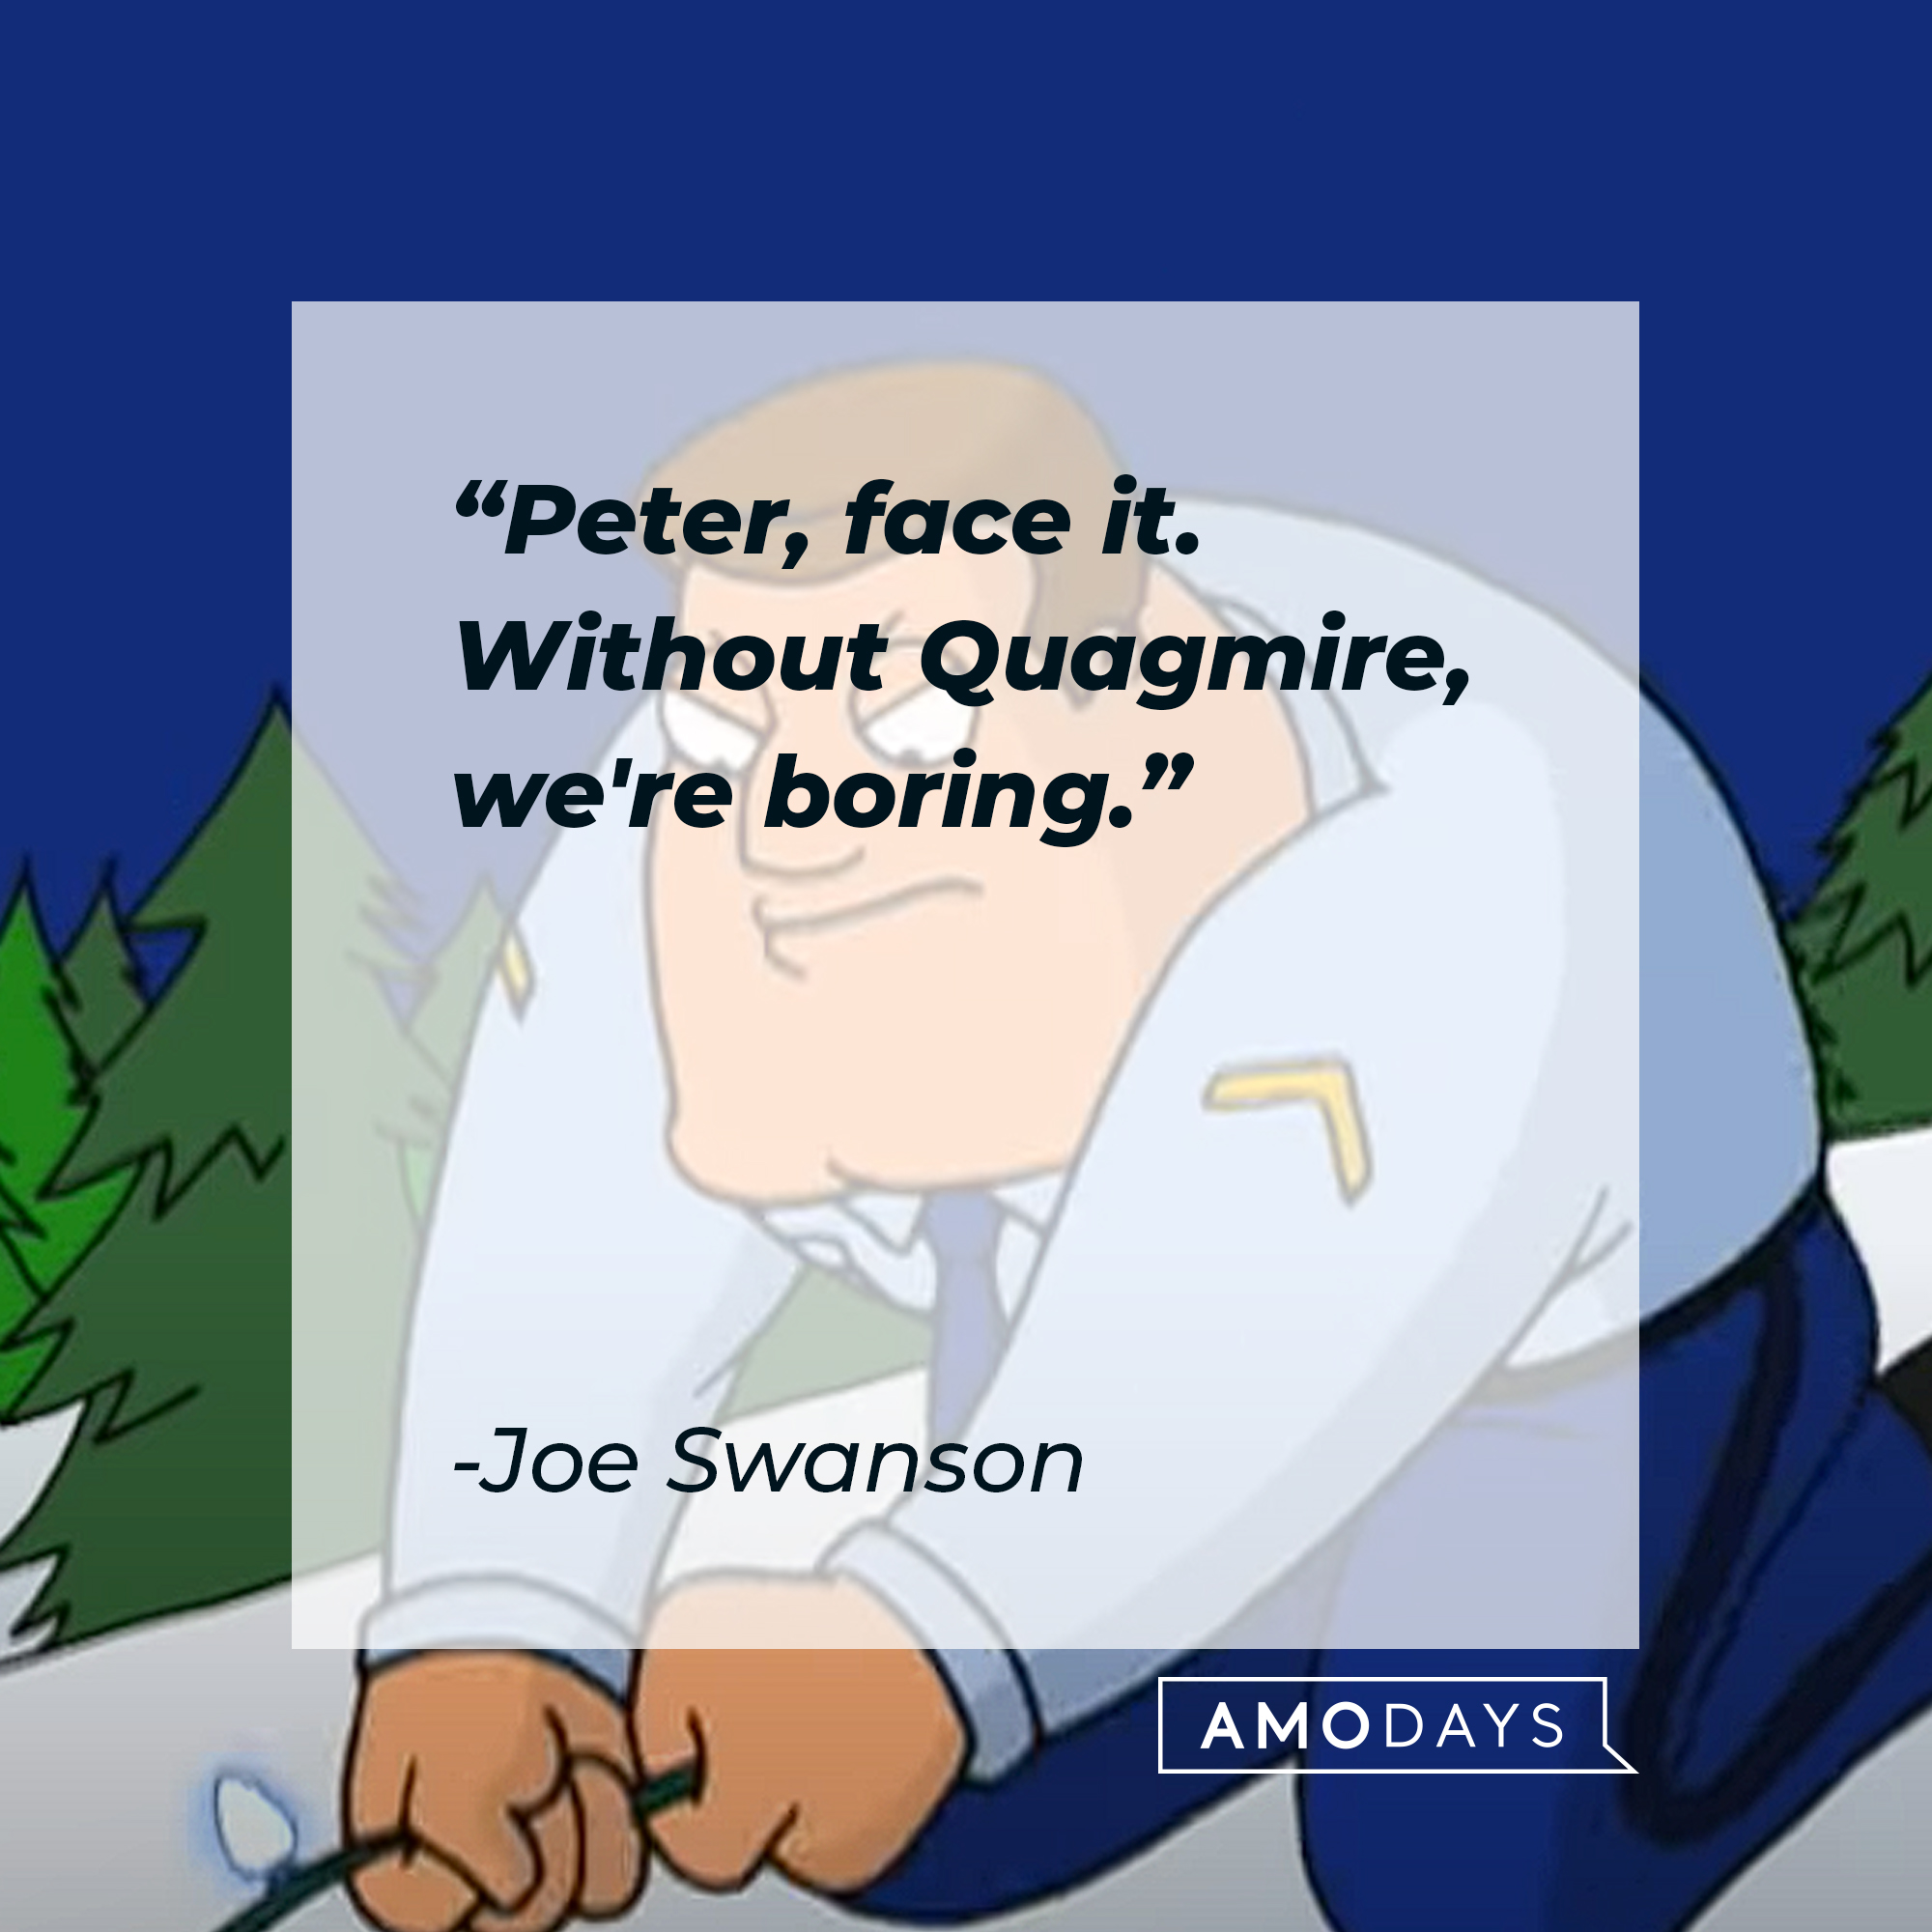 Joe Swanson from "Family Guy" with his quote: "Peter, face it. Without Quagmire, we're boring." | Source: YouTube.com/TBS